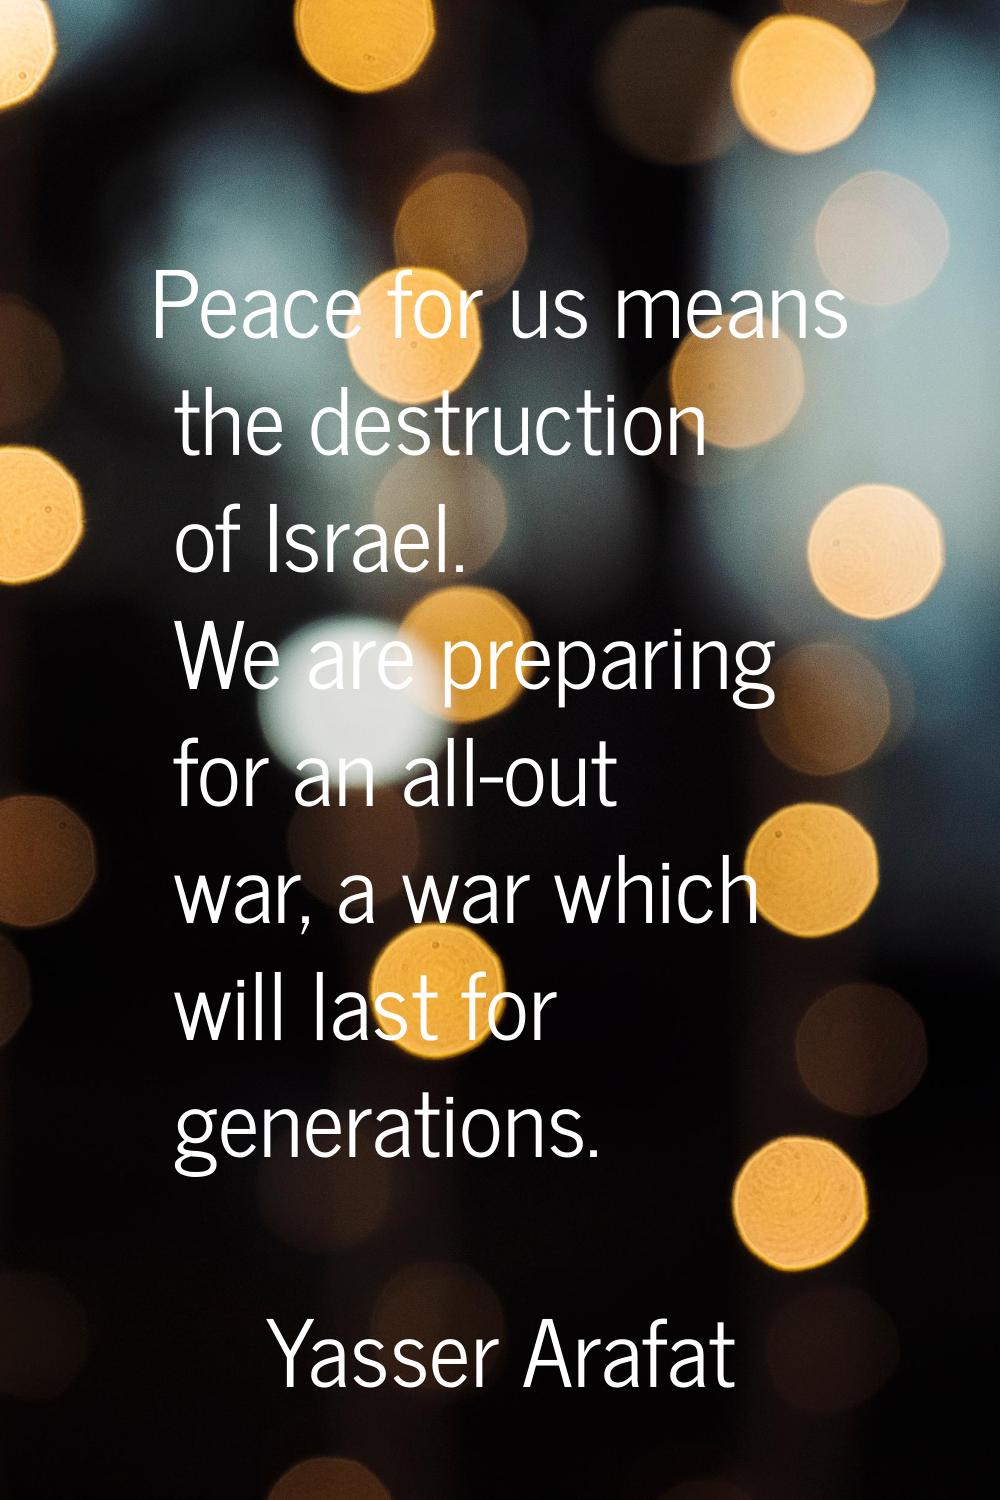 Peace for us means the destruction of Israel. We are preparing for an all-out war, a war which will